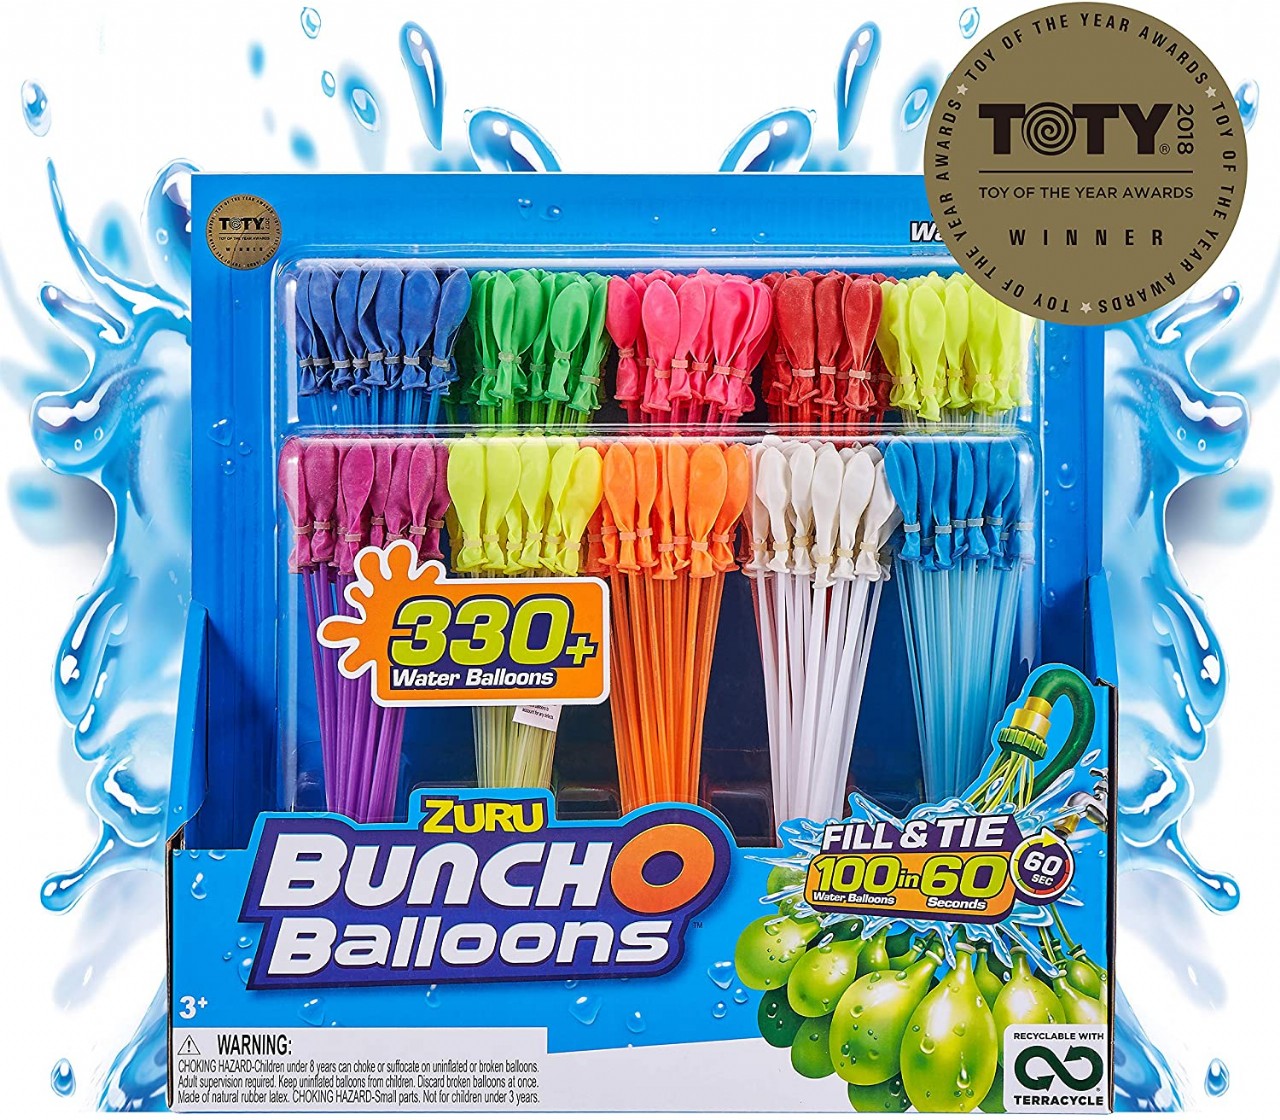 Bunch O Balloons - 350 Rapid-Fill Water Balloons (10 Pack) Amazon Exclusive